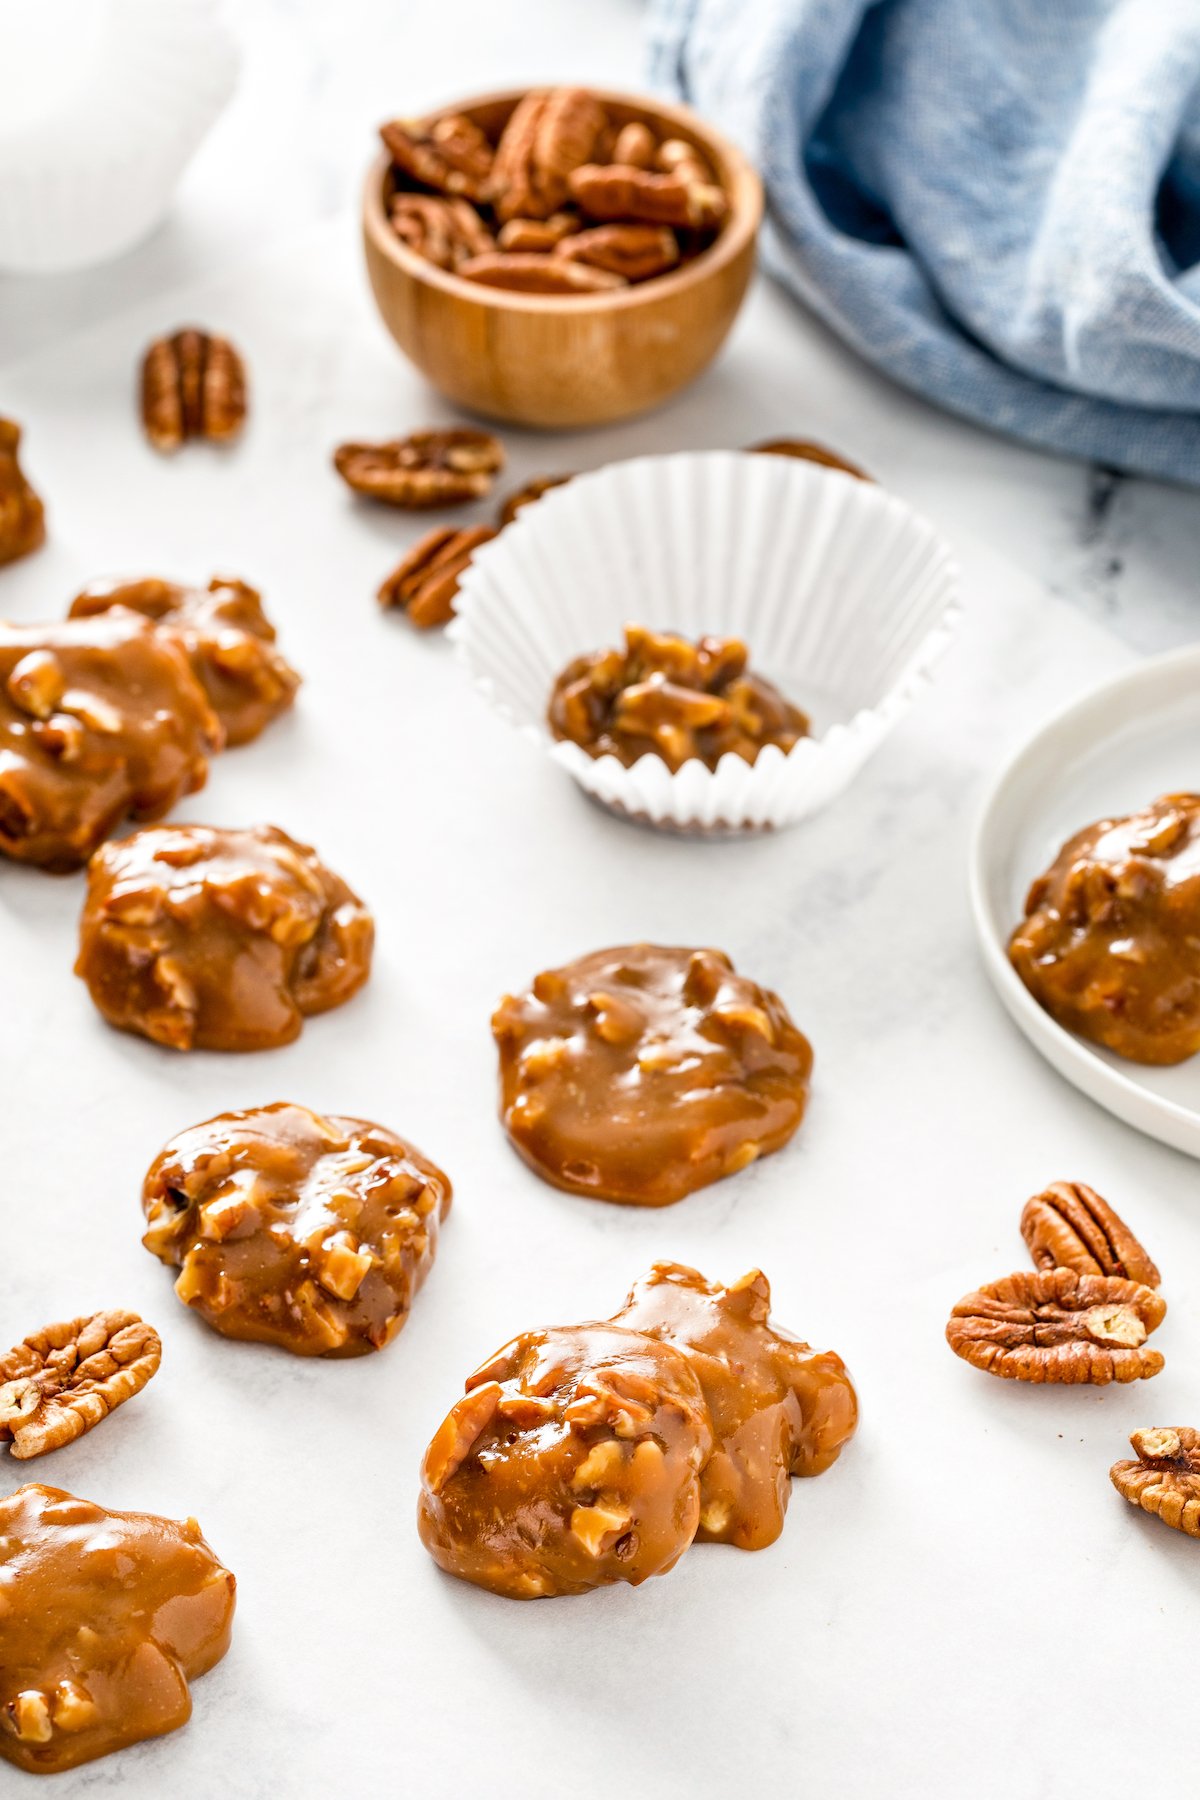 Caramel pecan candies stacked around on parchment paper with a bowl of pecans.